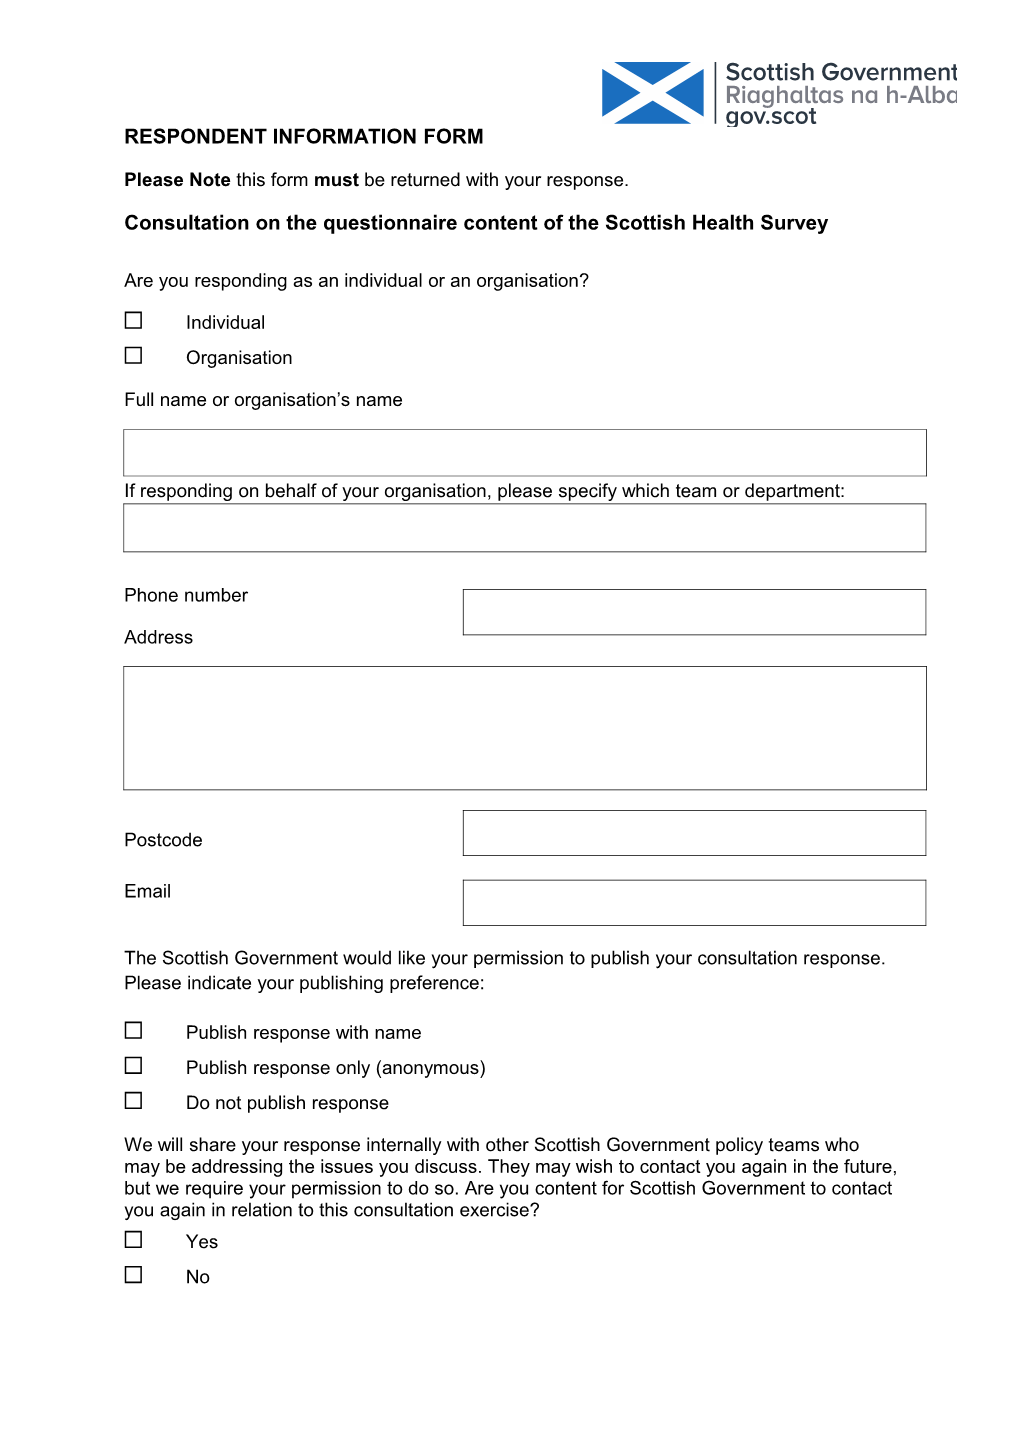 Consultation on the Questionnaire Content of the Scottish Health Survey Form